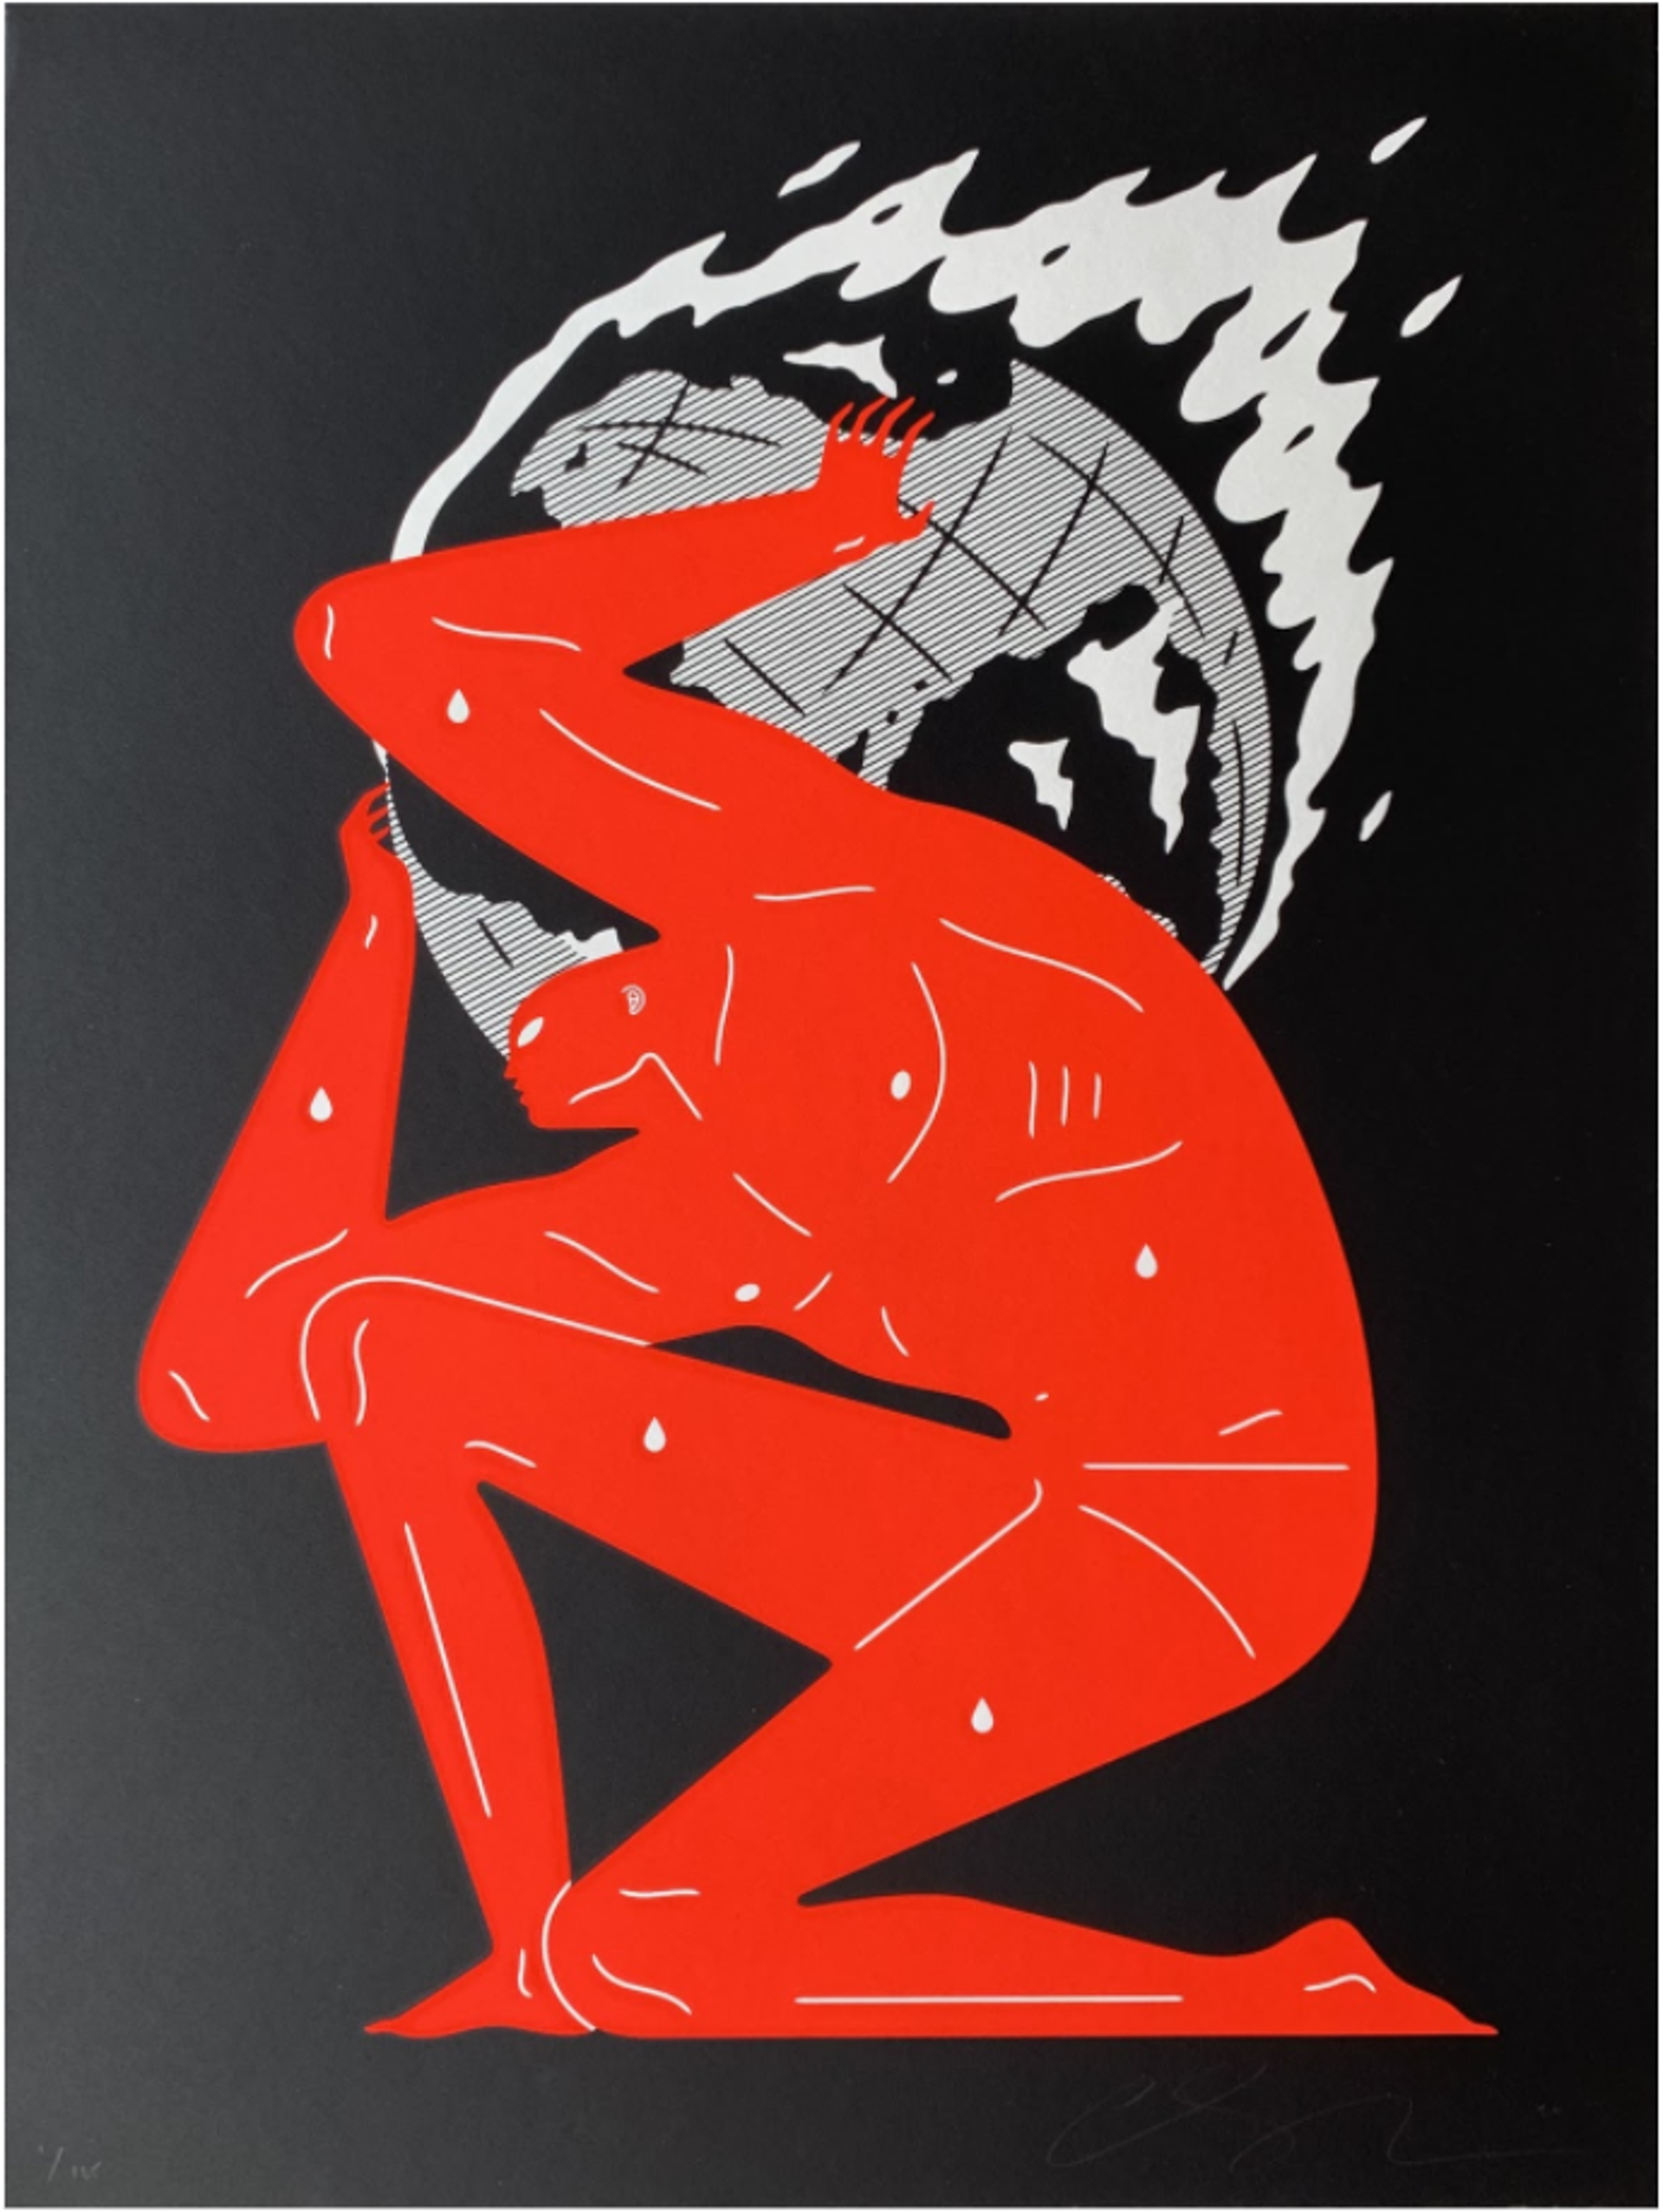 World on Fire by Cleon Peterson